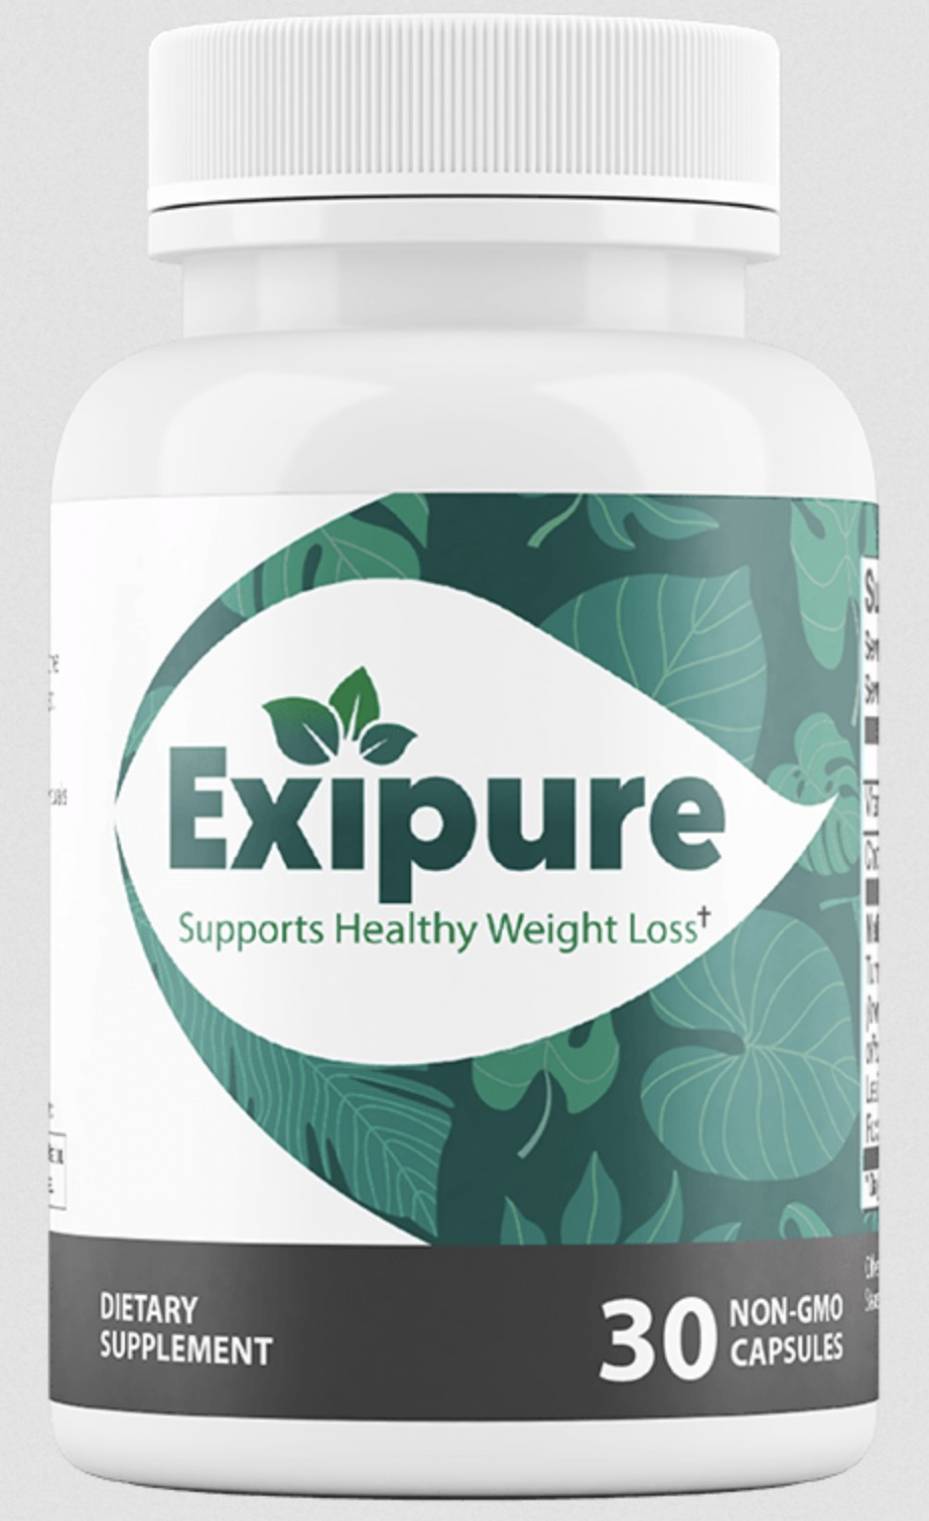 How Well Does Exipure Work